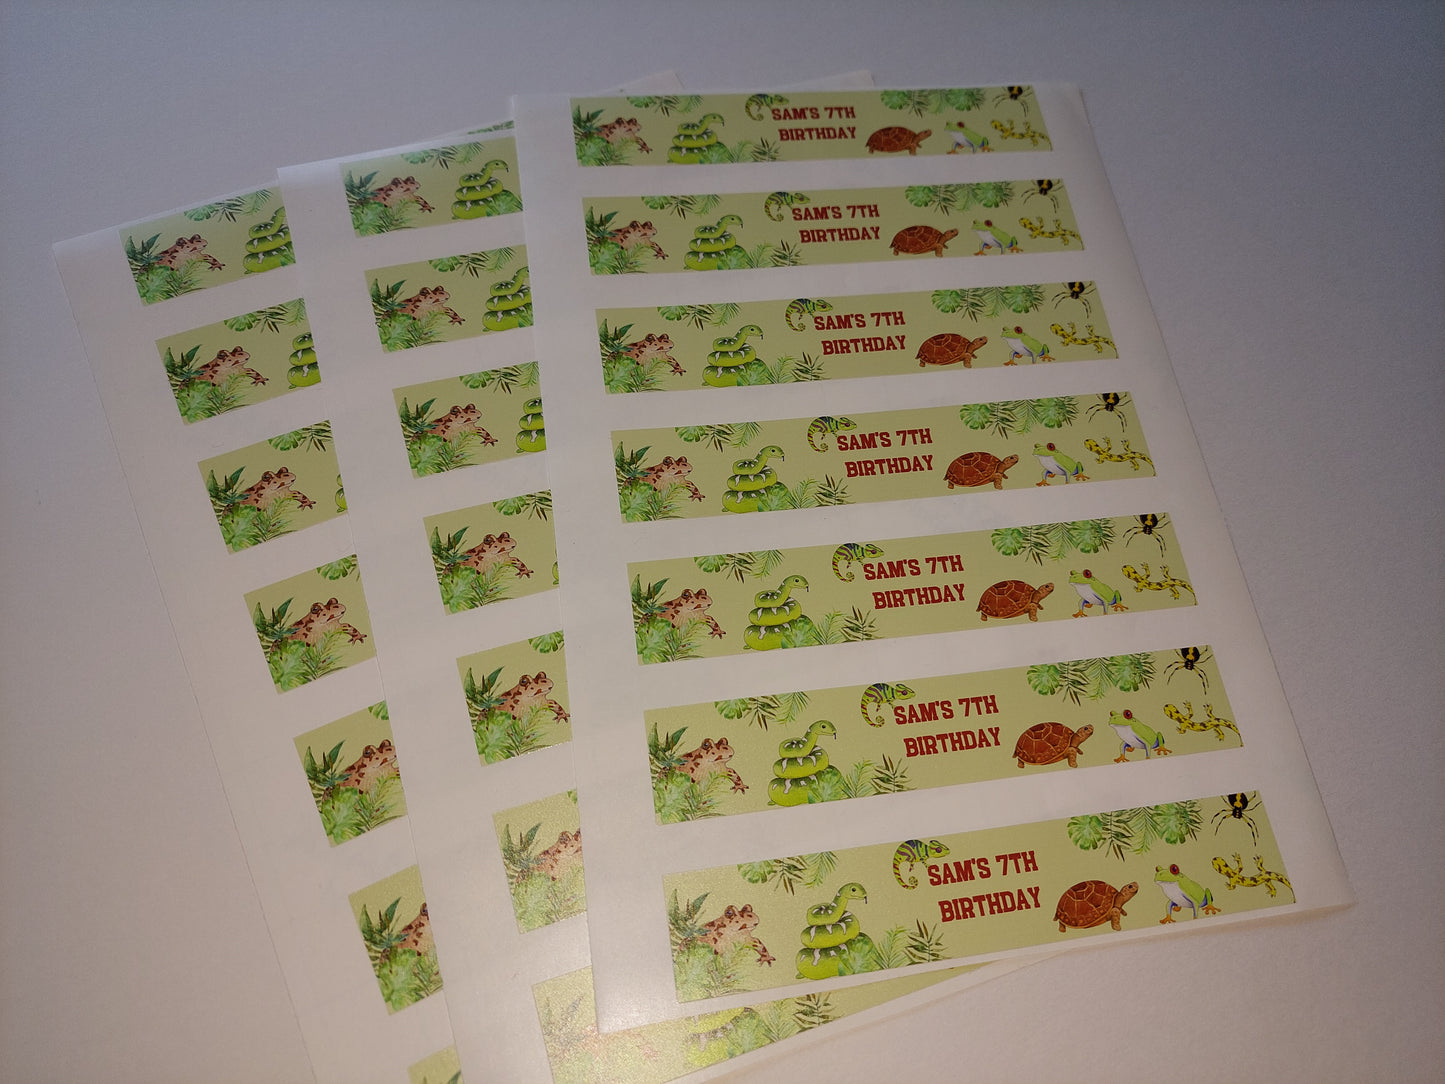 Juice Bottle Labels | Personalised Reptile Labels | Water Bottle Stickers | Reptile Party | Party Stickers